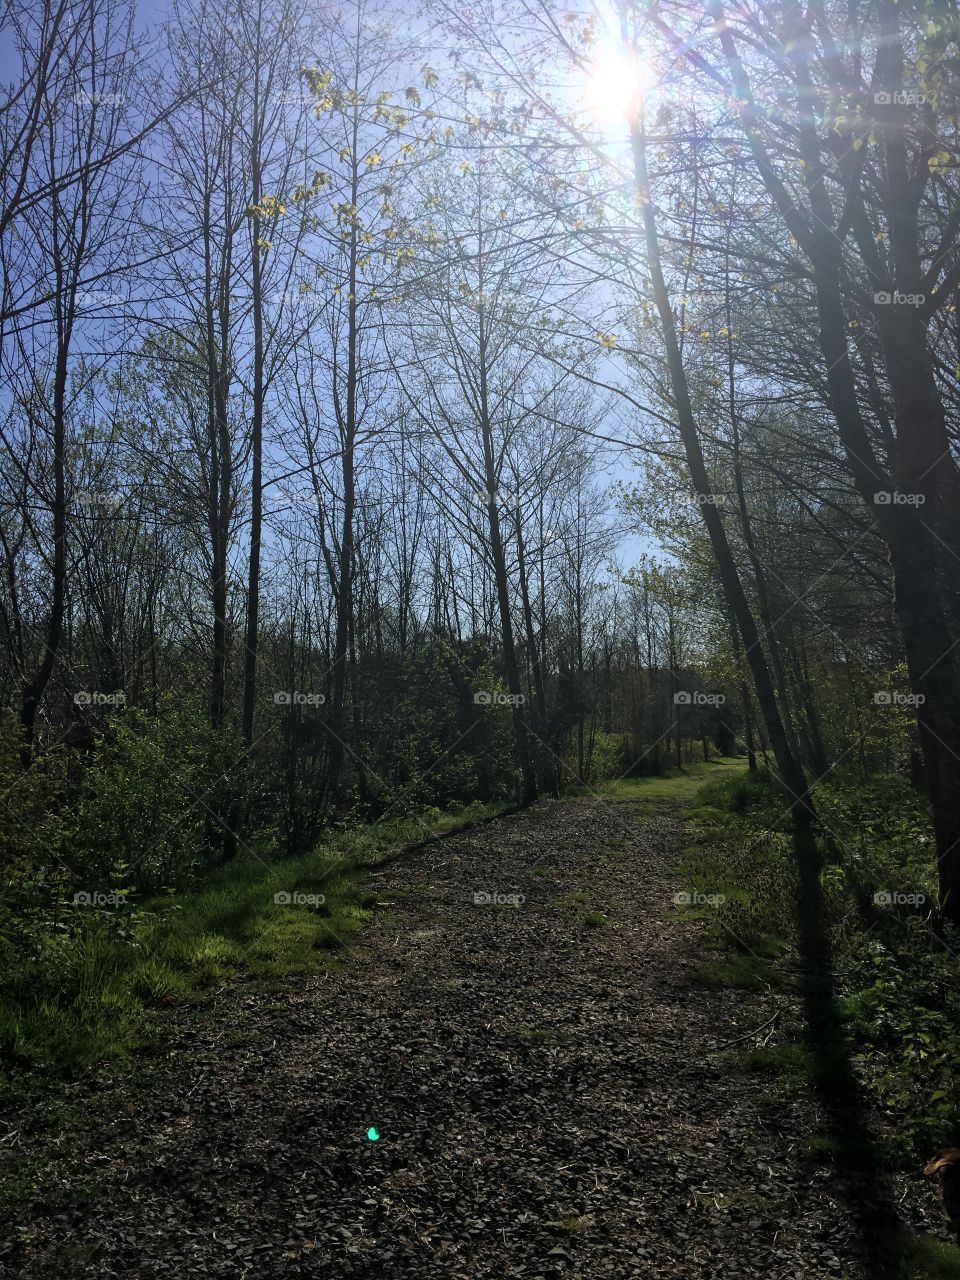 Sun shines on a gravel road turning to grassy path in the early spring in the forest. 